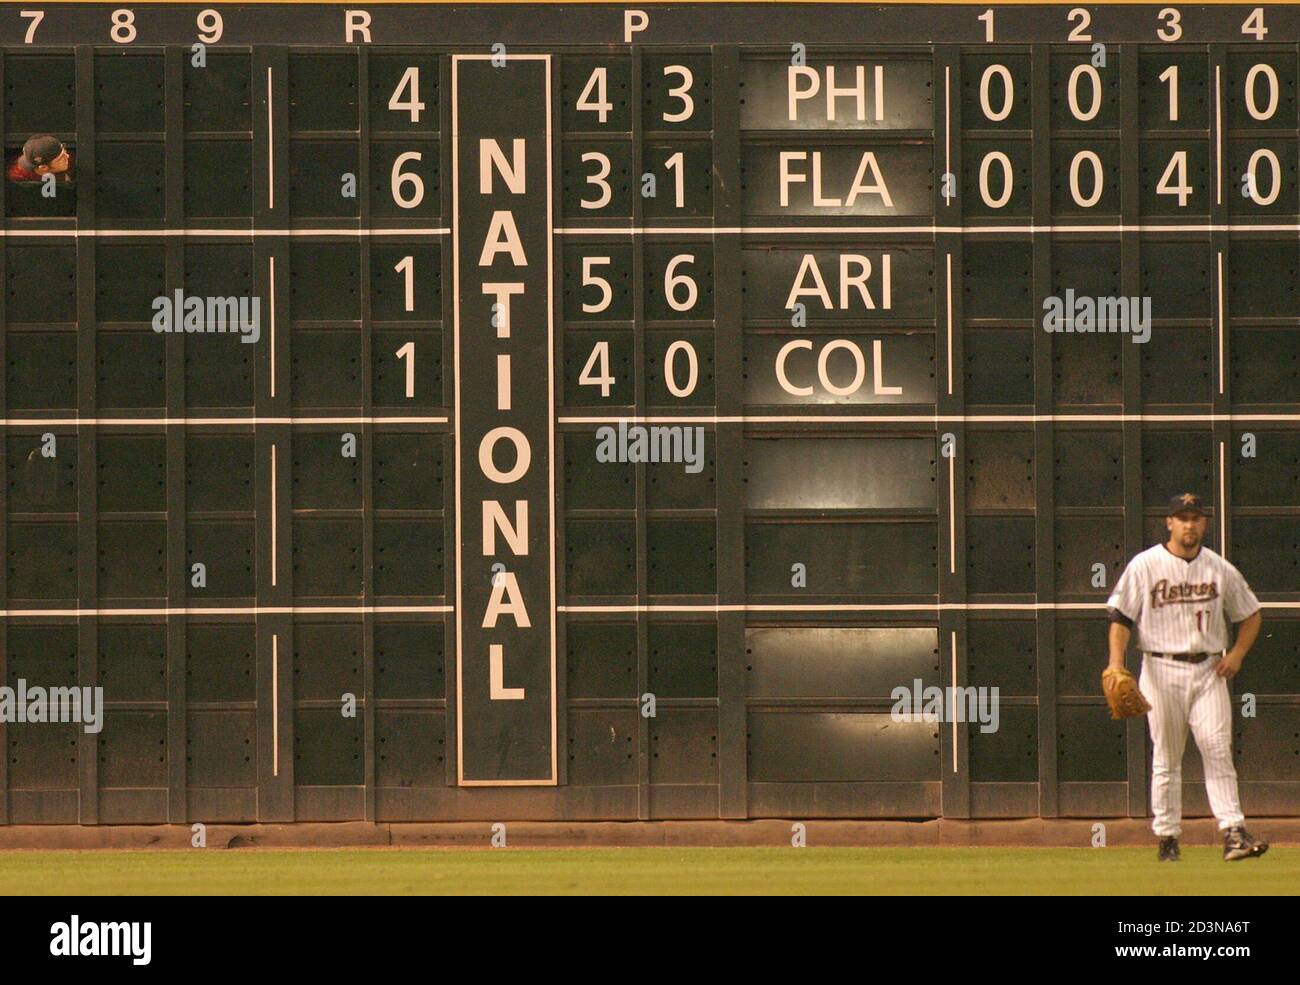 The scoreboard operator (upper left) yells at Houston Astros left fielder Lance Berkman to let him know the Reds had taken the lead over the Cubs in the National League Central game, during the fourth inning September 25, 2003 in Houston. The Astros, playing the Milwaukee Brewers, trailed the Cubs by one game going into tonight's play. REUTERS/F. Carter Smith  FCS/HB Stock Photo